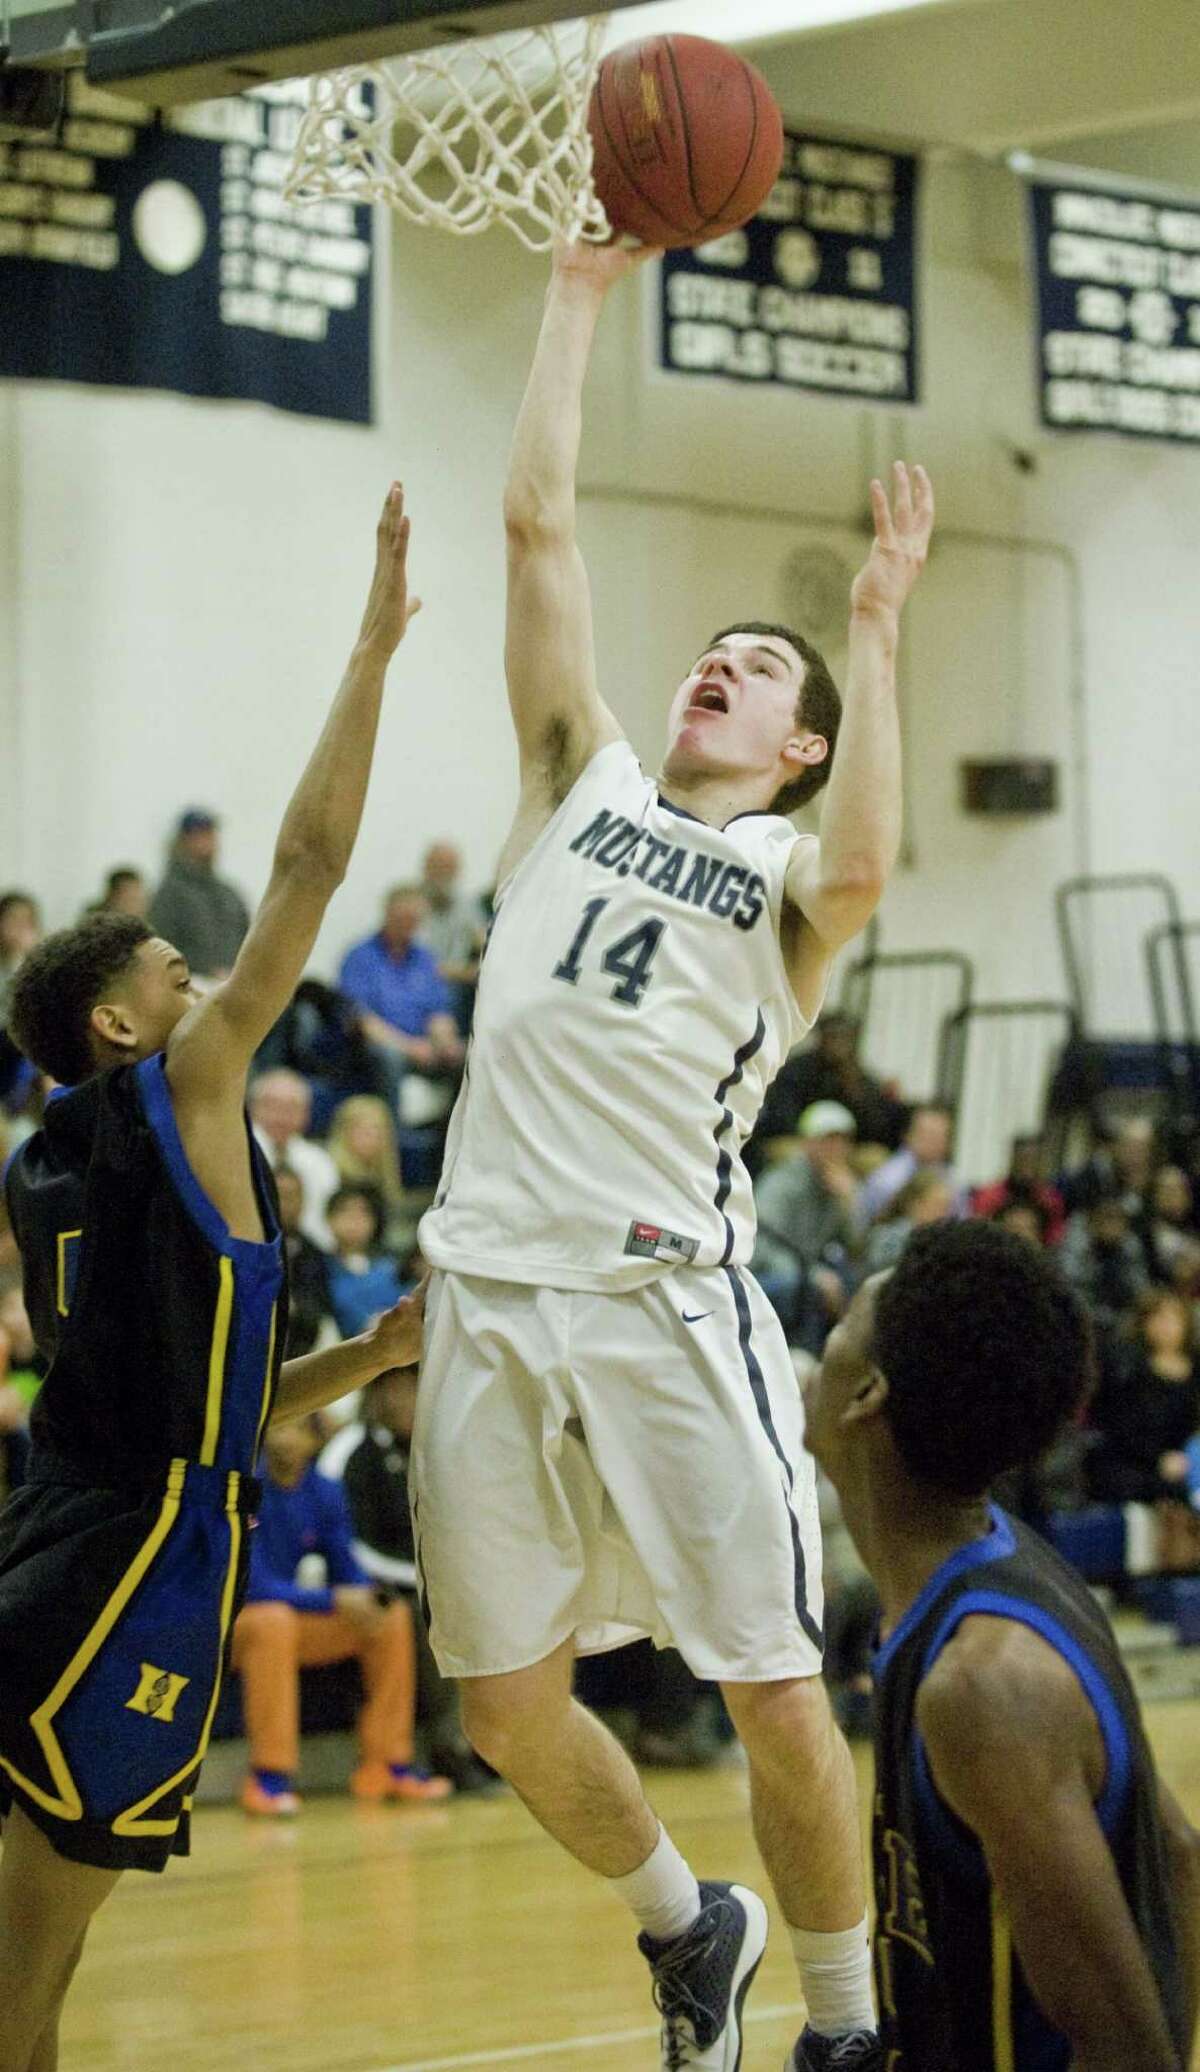 FILE PHOTO: Immaculate High School's Ronan Doherty goes up to the basket during the Class S game against Hyde Leadership School, played at Immaculate. Monday, March 7, 2016